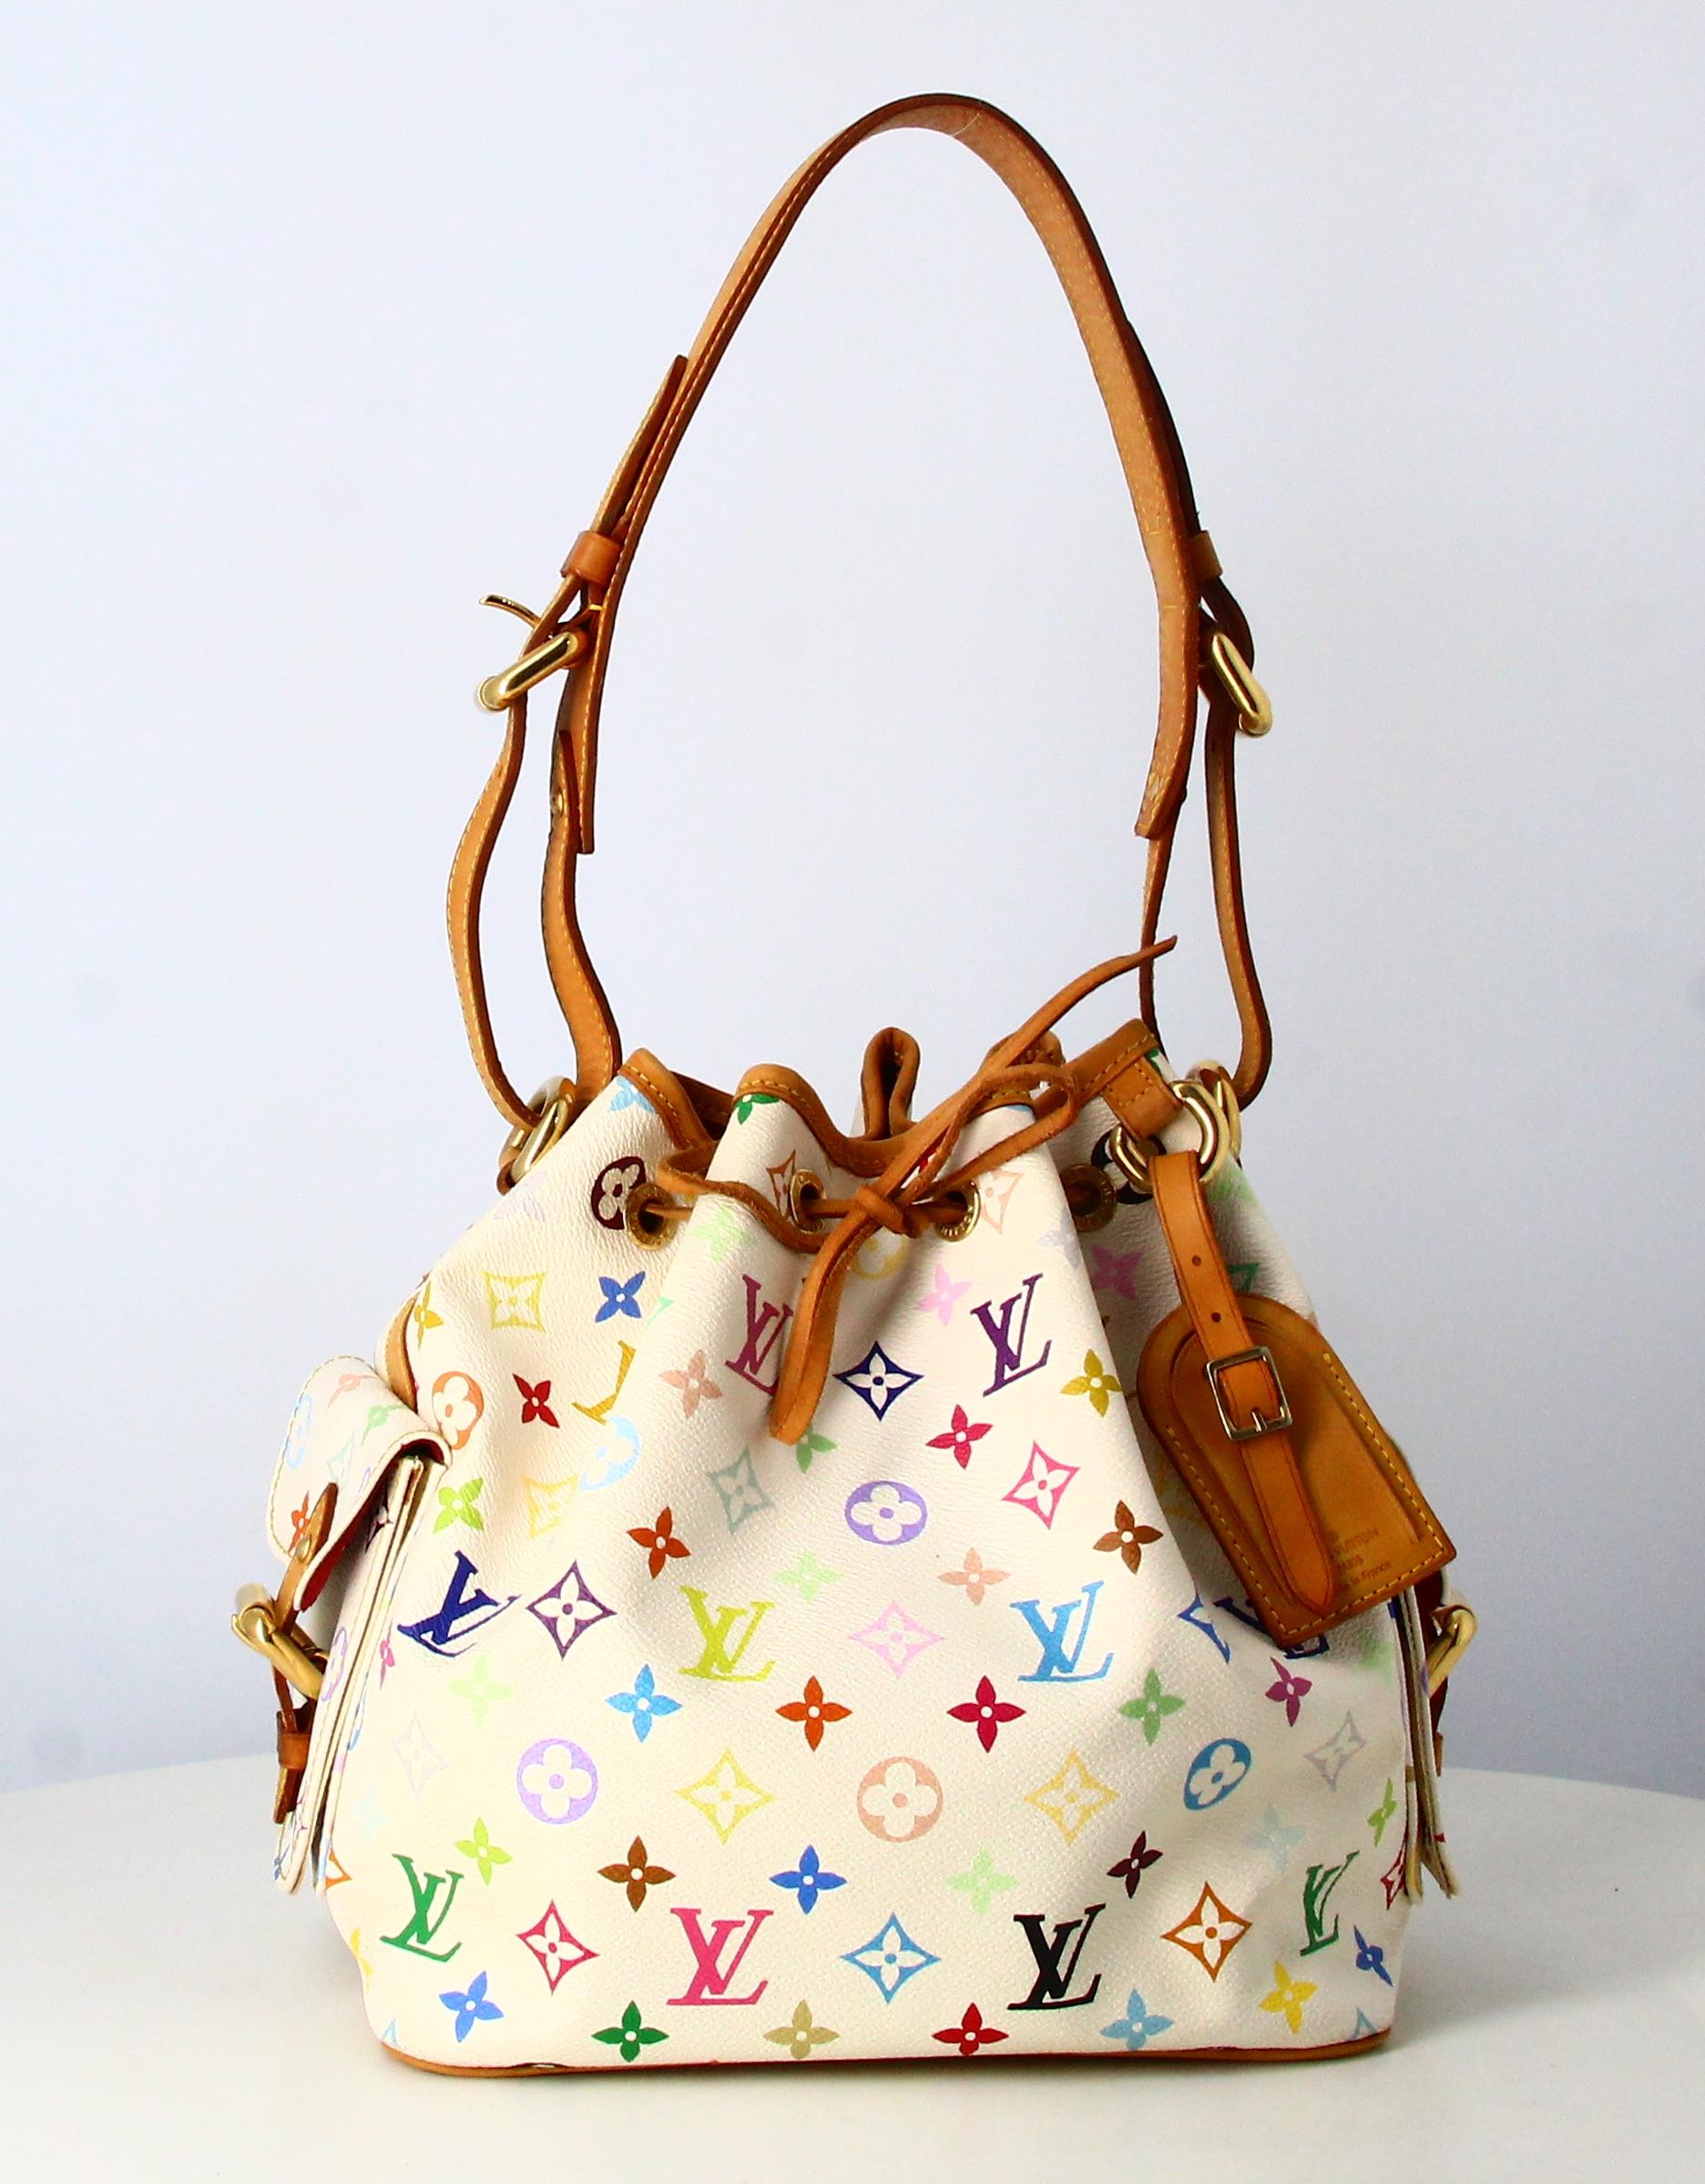 2006 Noé Multicolore Handbag Louis Vuitton Canvas Monogram 

- Good condition. Shows very slight signs of wear over time. 
- Louis Vuitton Handbag
- Multicolour white monogram 
- Brown leather hanse 
- Two small pockets on the side 
- Inside: